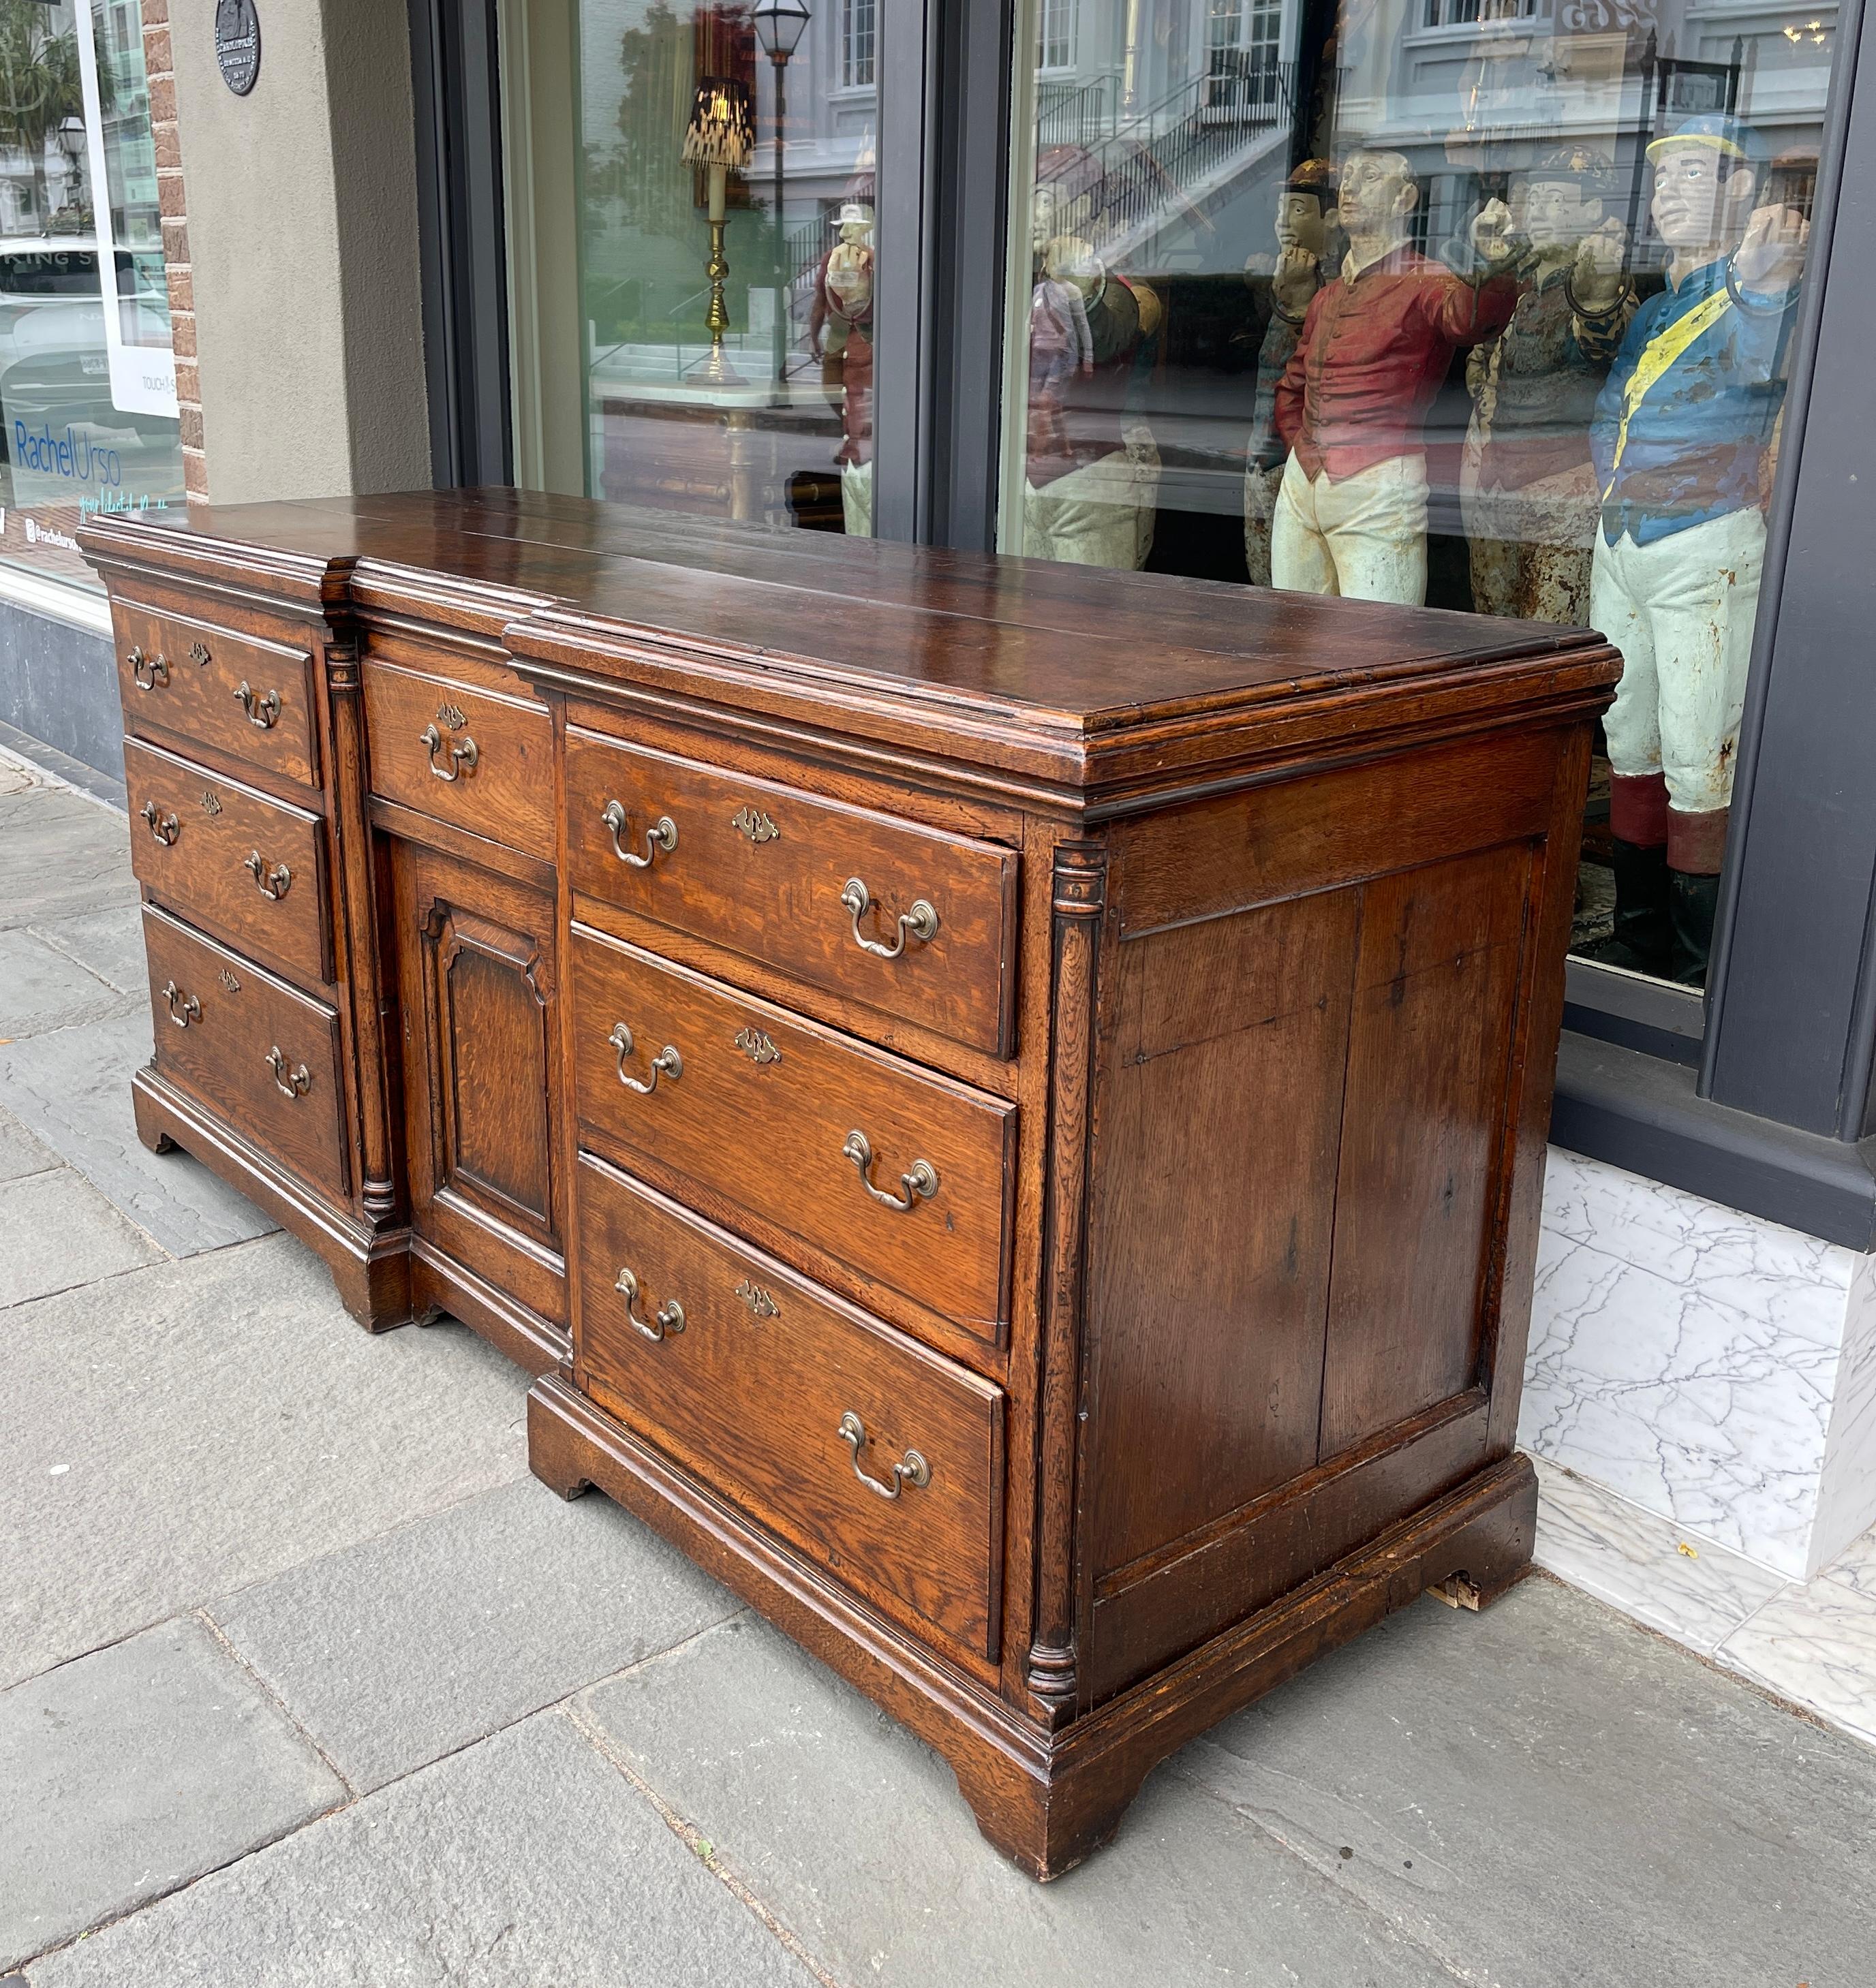 Lovely oak dresser base with 6 side drawers and center drawer over open cabinet.